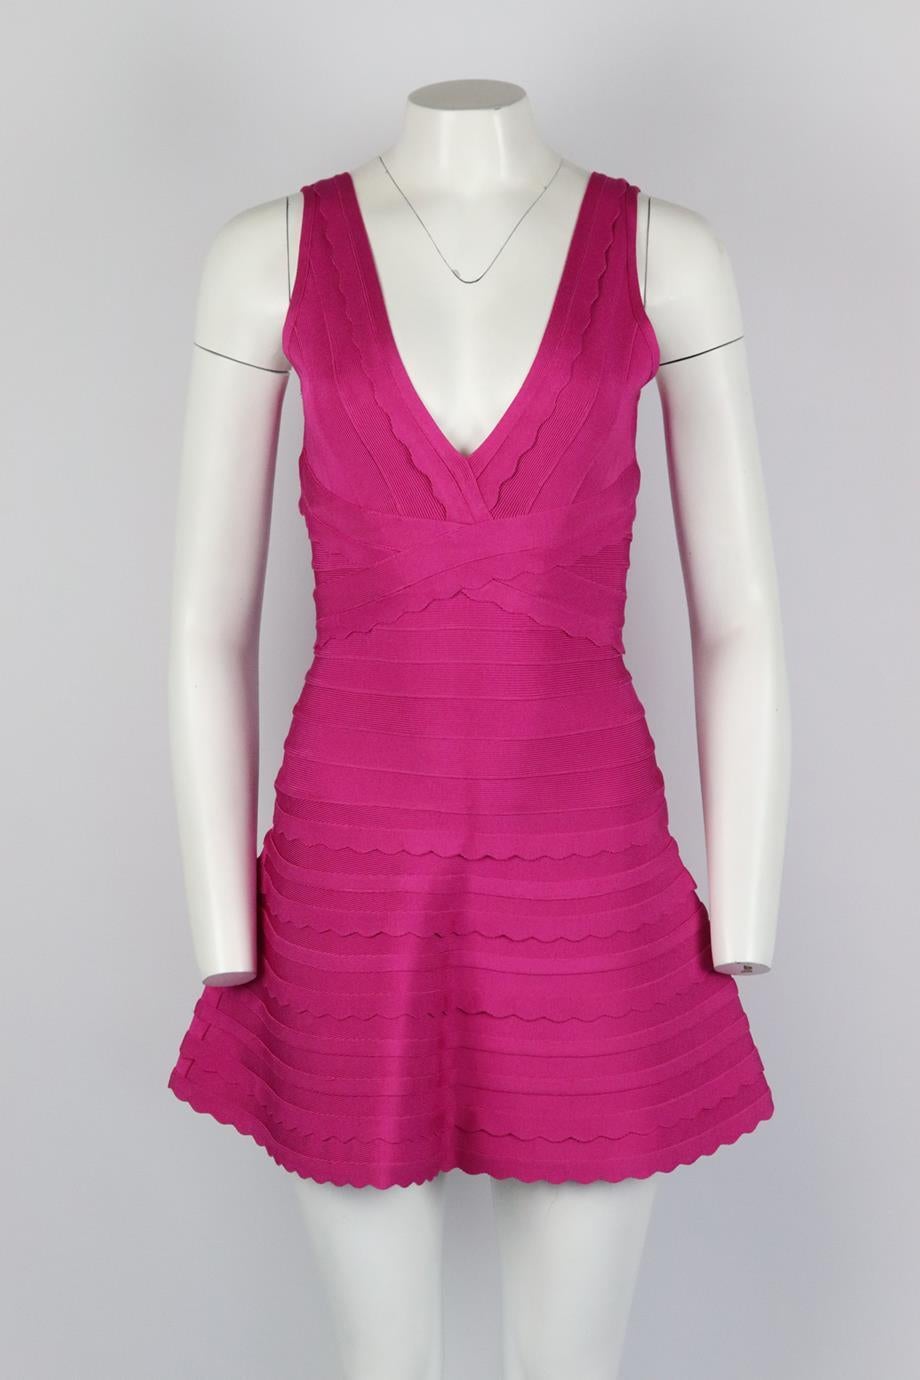 Herve Leger bandage mini dress. Pink. Sleeveless, v-neck. Zip fastening at back. 91% Rayon, 8% nylon, 1% spandex. Size: Small (UK 8, US 4, FR 36, IT 40). Bust: 32 in. Waist: 23 in. Hips: 41 in. Length: 32 in. Very good condition - Hem has been taken